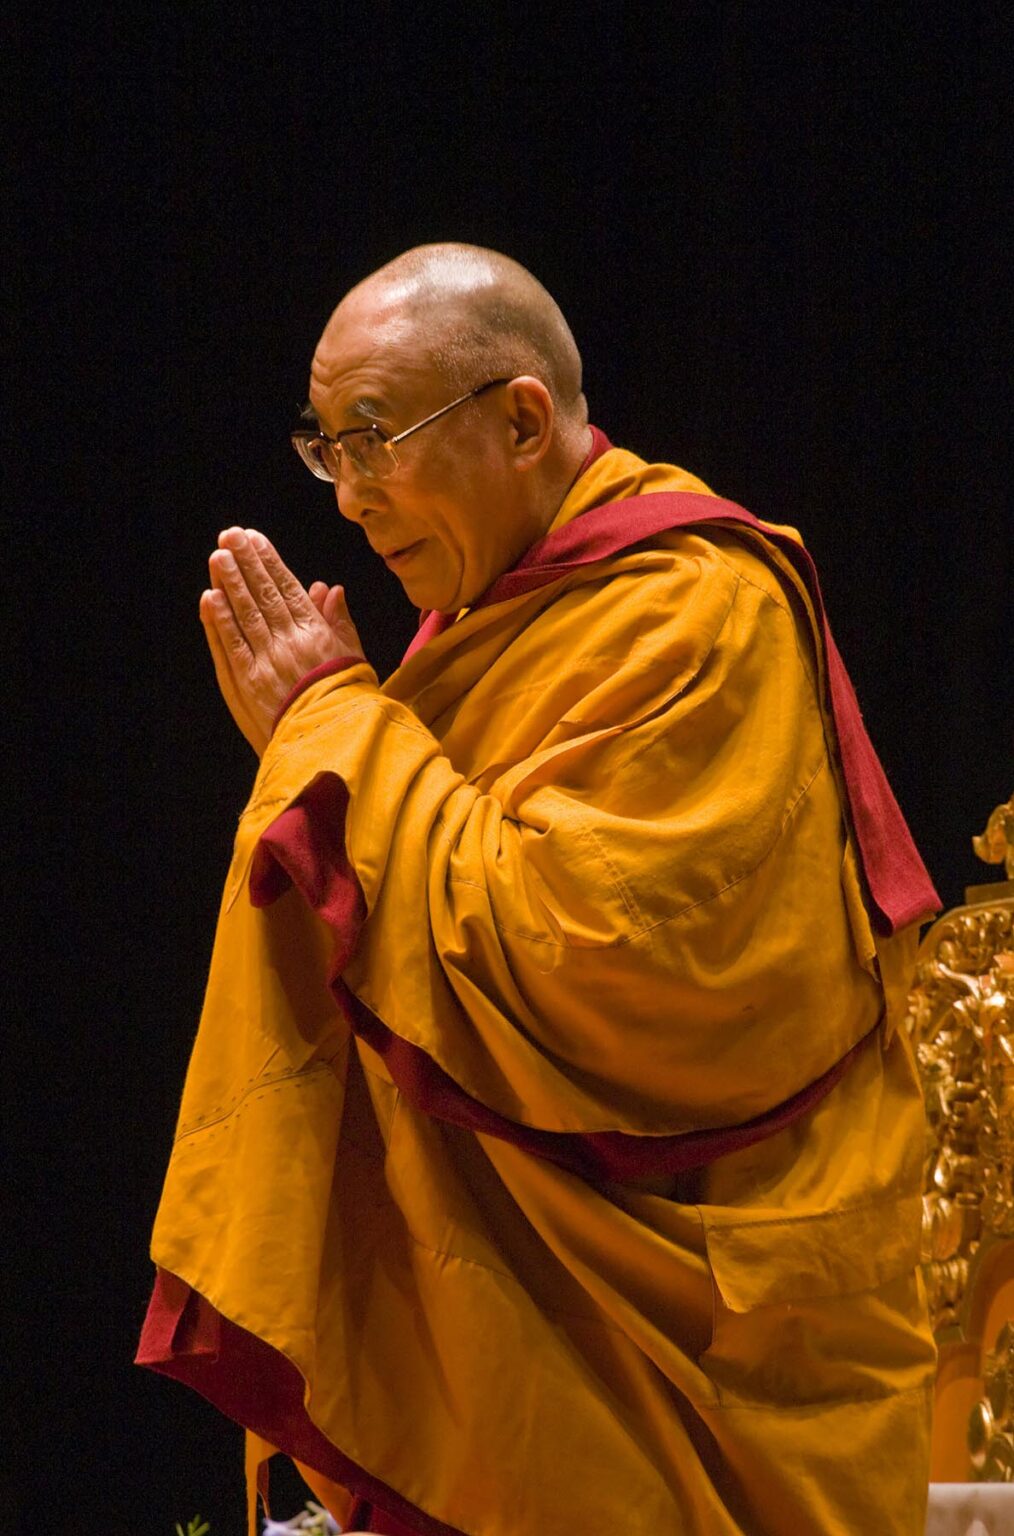 The 14th DALAI LAMA of Tibet teaches Buddhism sponsored by the TIBETAN MONGOLIAN CULTURAL CENTER - BLOOMINGTON, INDIANA